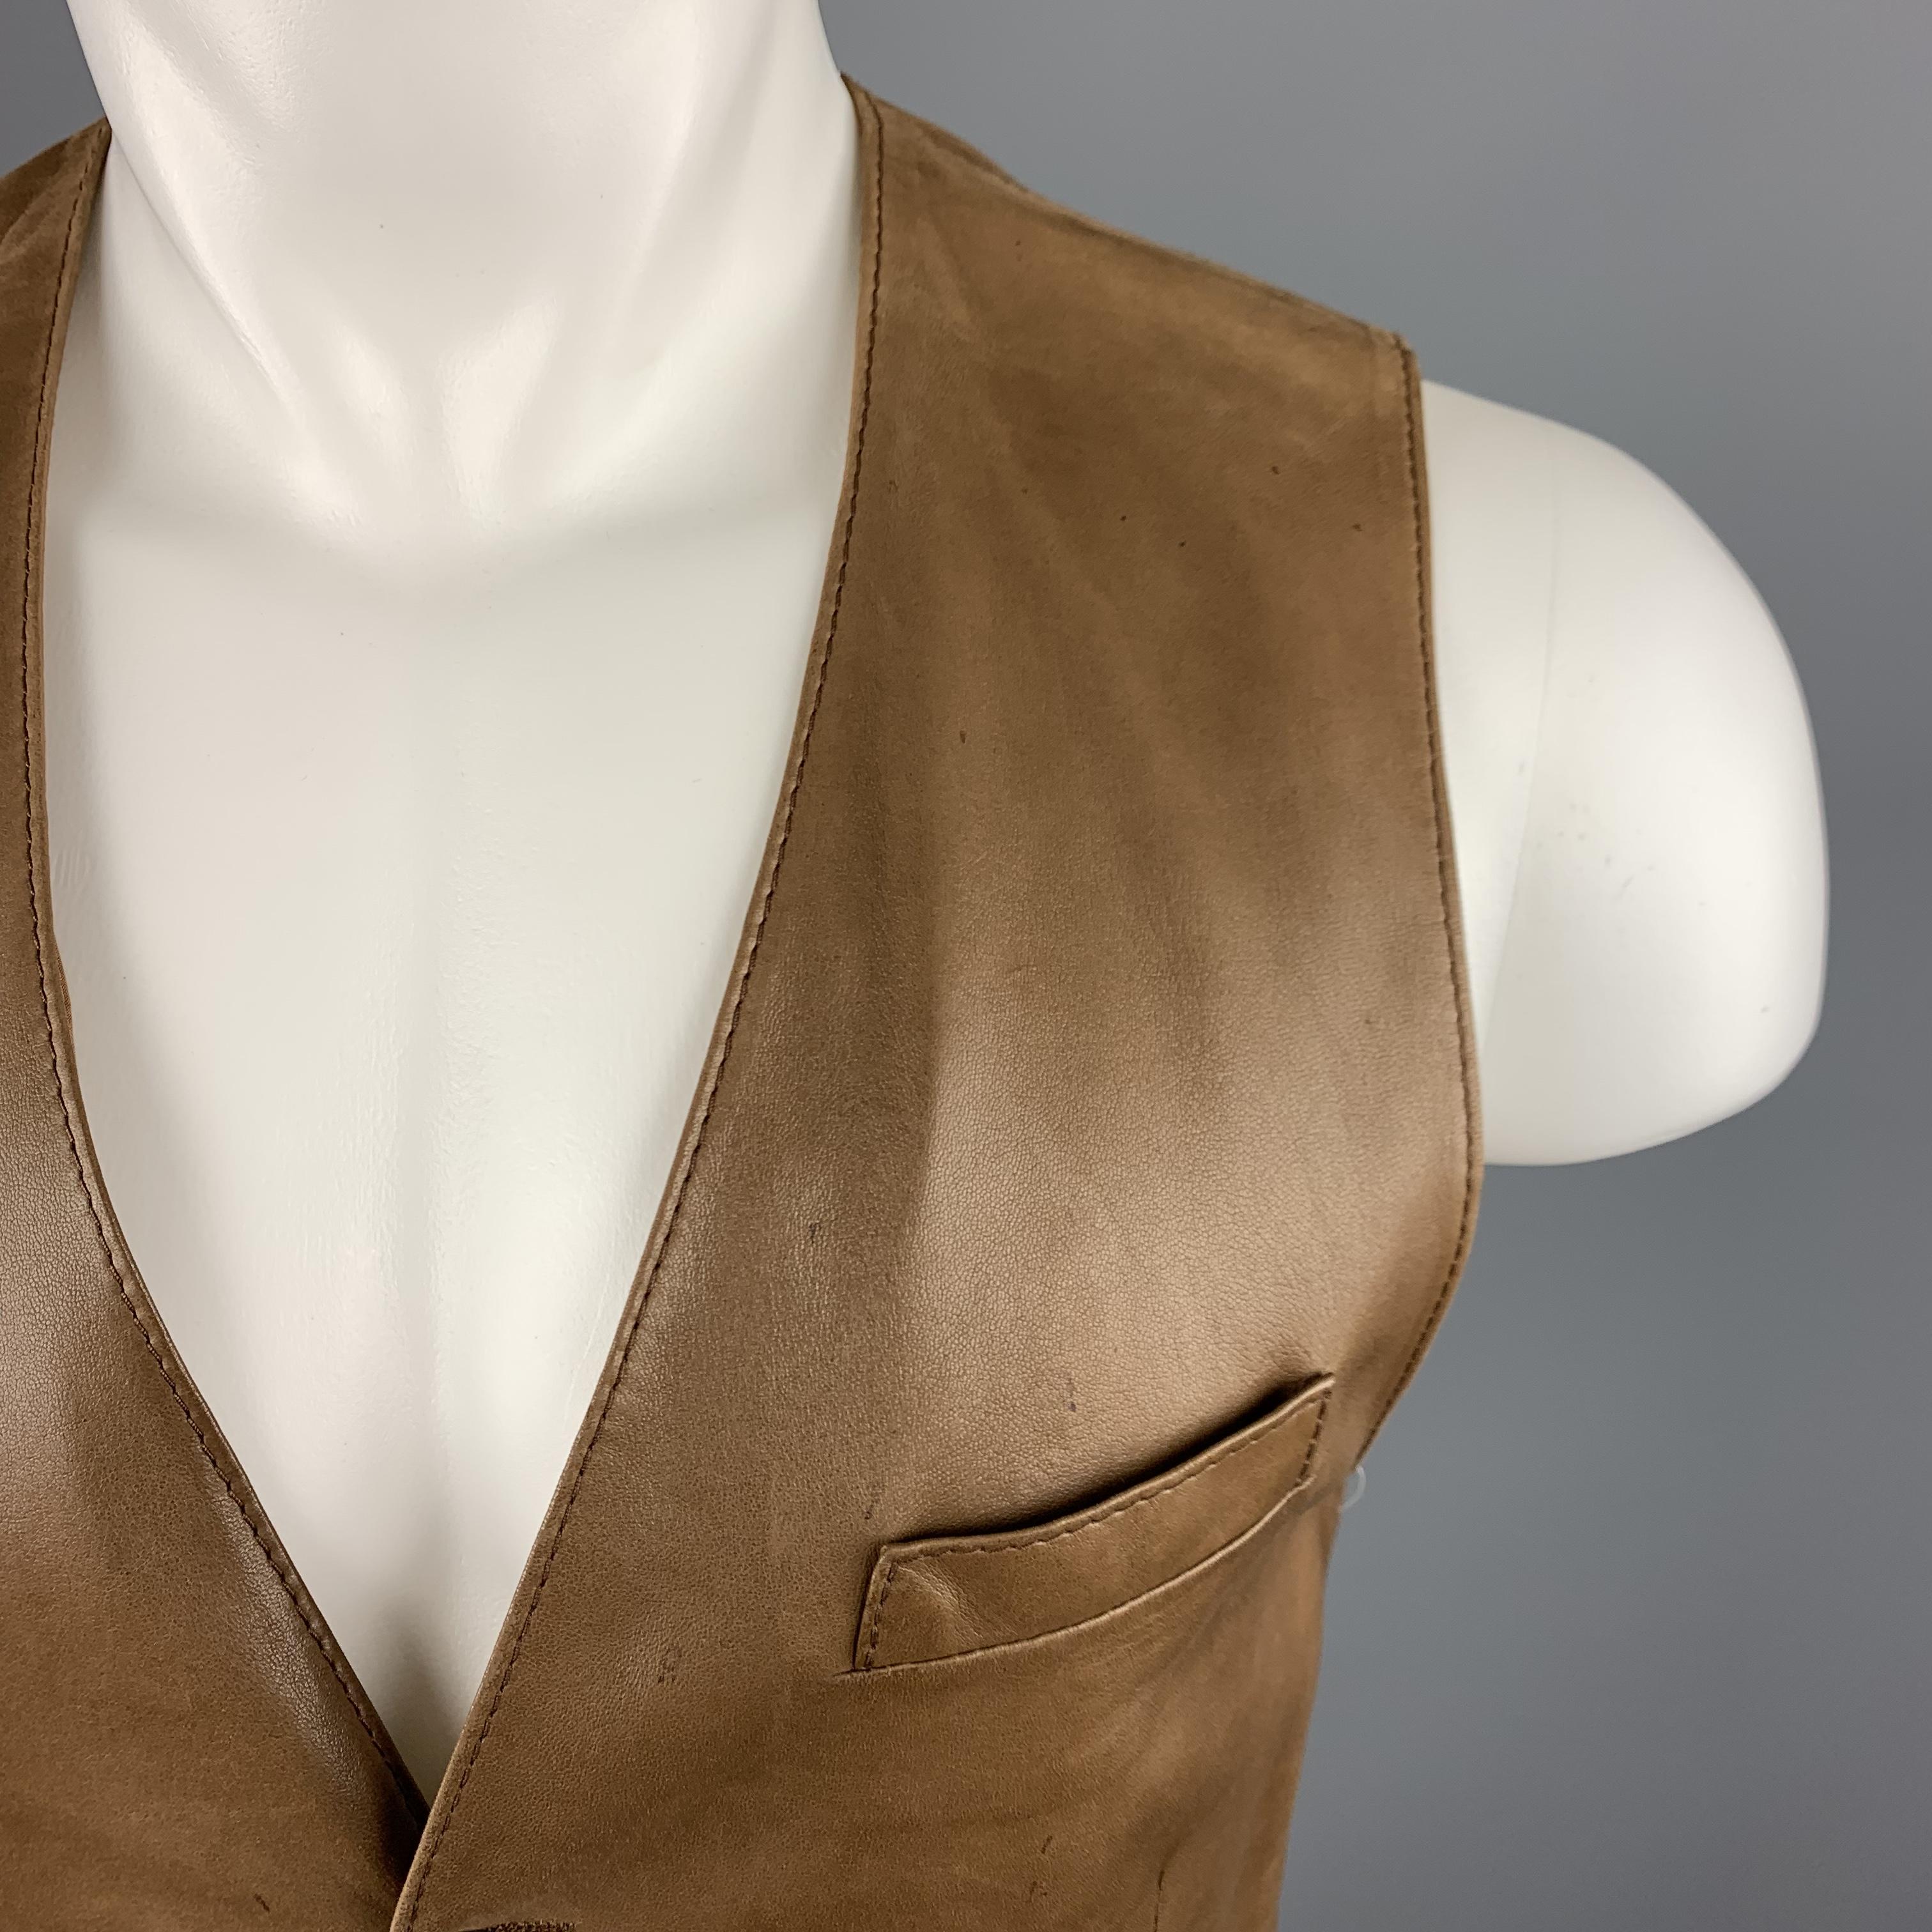 SPORTS HERMES by HERMES Vest comes in a solid tan leather, featuring a V-neck, slit pockets, five silver tone metal buttons at closure and a back belt. Wear, with small spots at front. Made in Belgium.
 
Very Good Pre-Owned Condition.
Marked: No